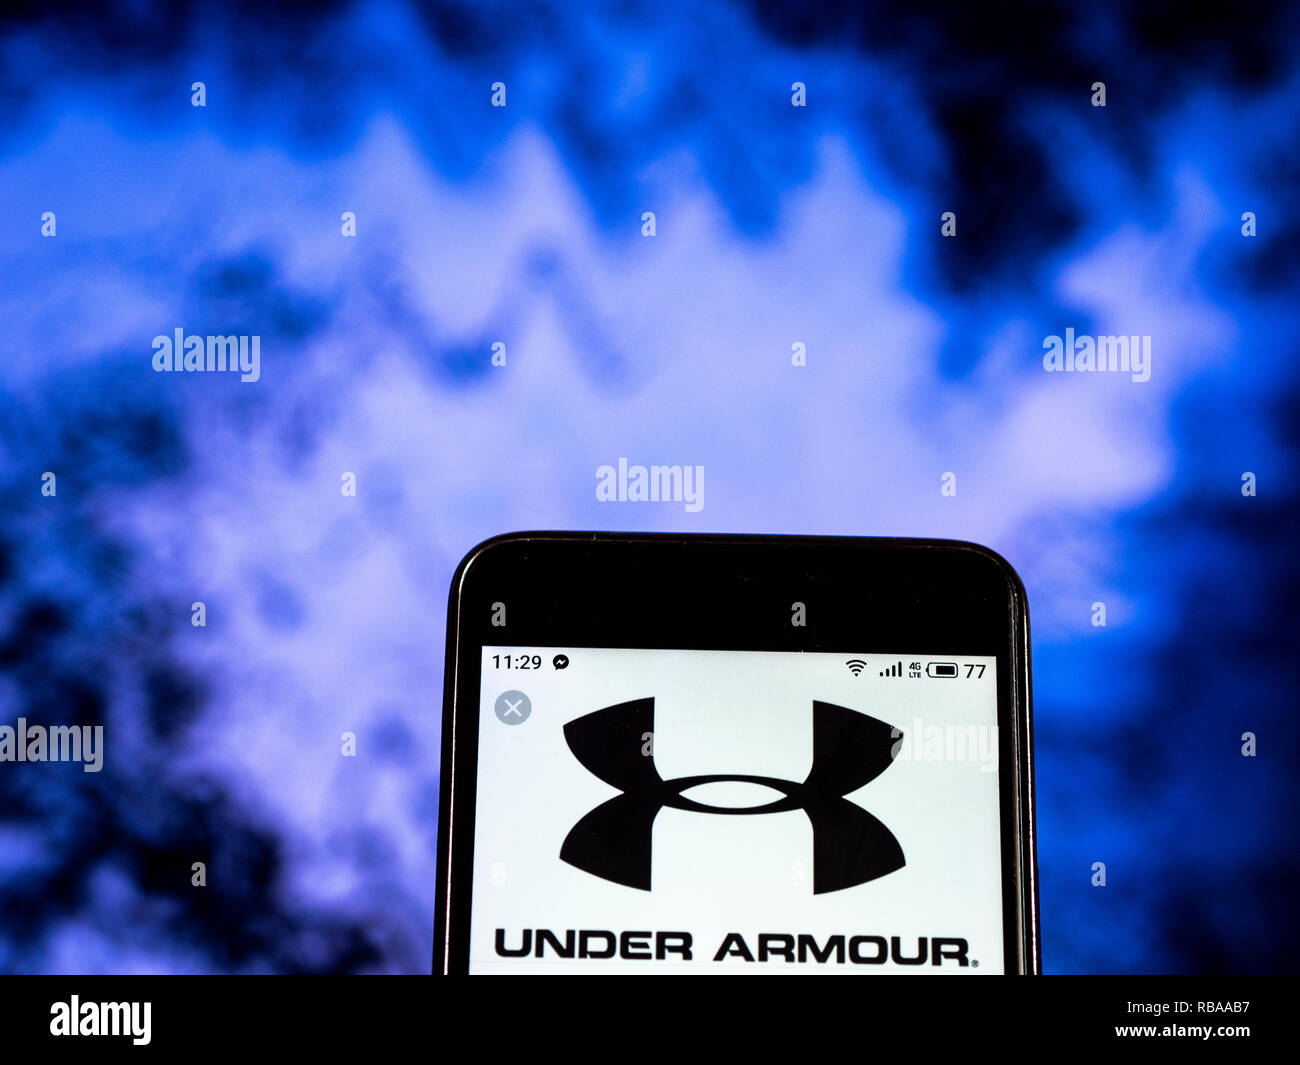 Under Armour Footwear company logo seen displayed on smart phone Stock  Photo - Alamy